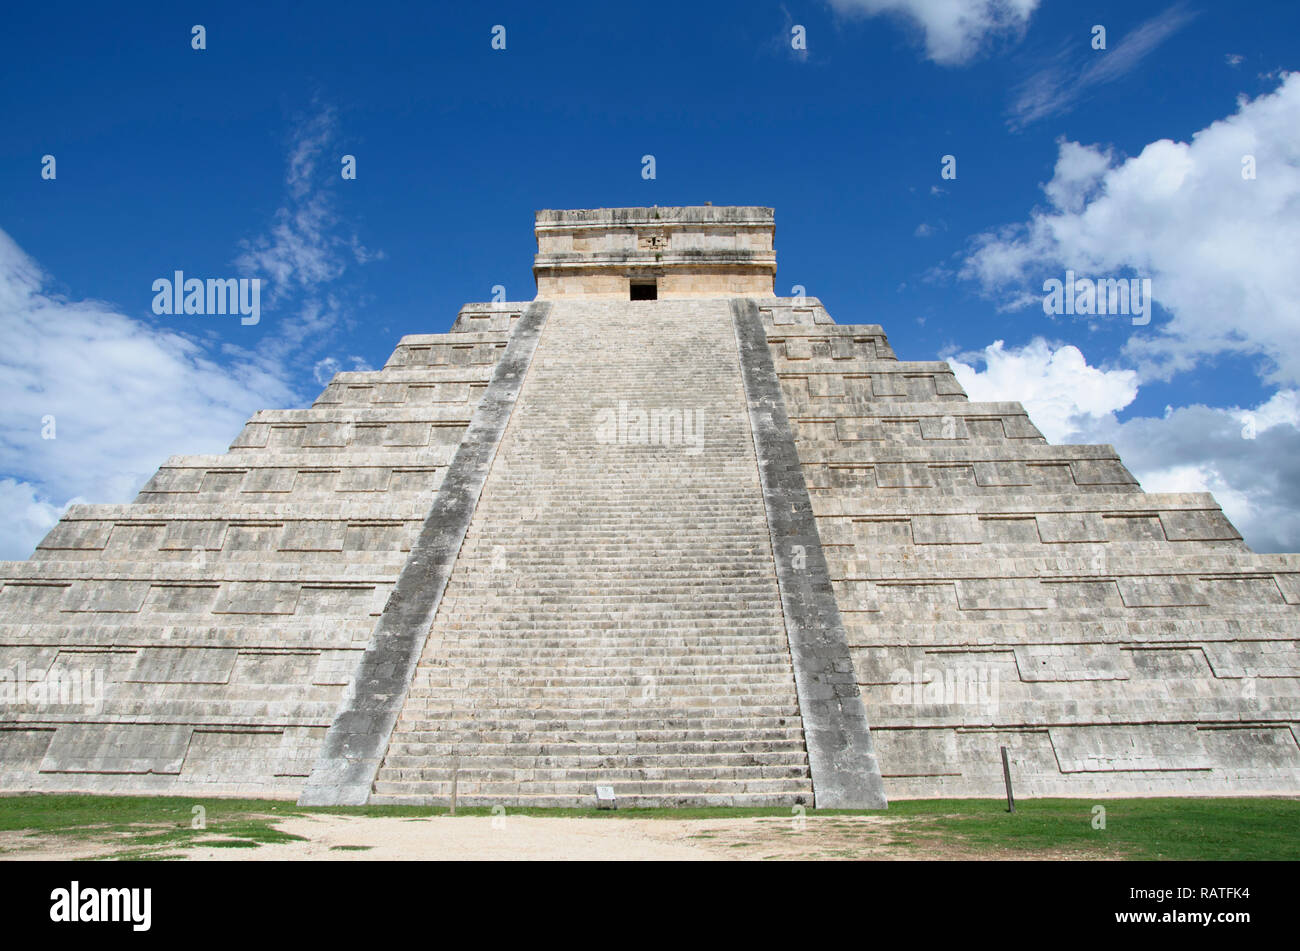 The Pyramid of Kukulkan at Chichen Itza in Mexico, one of the New Seven Wonders of the World. Stock Photo